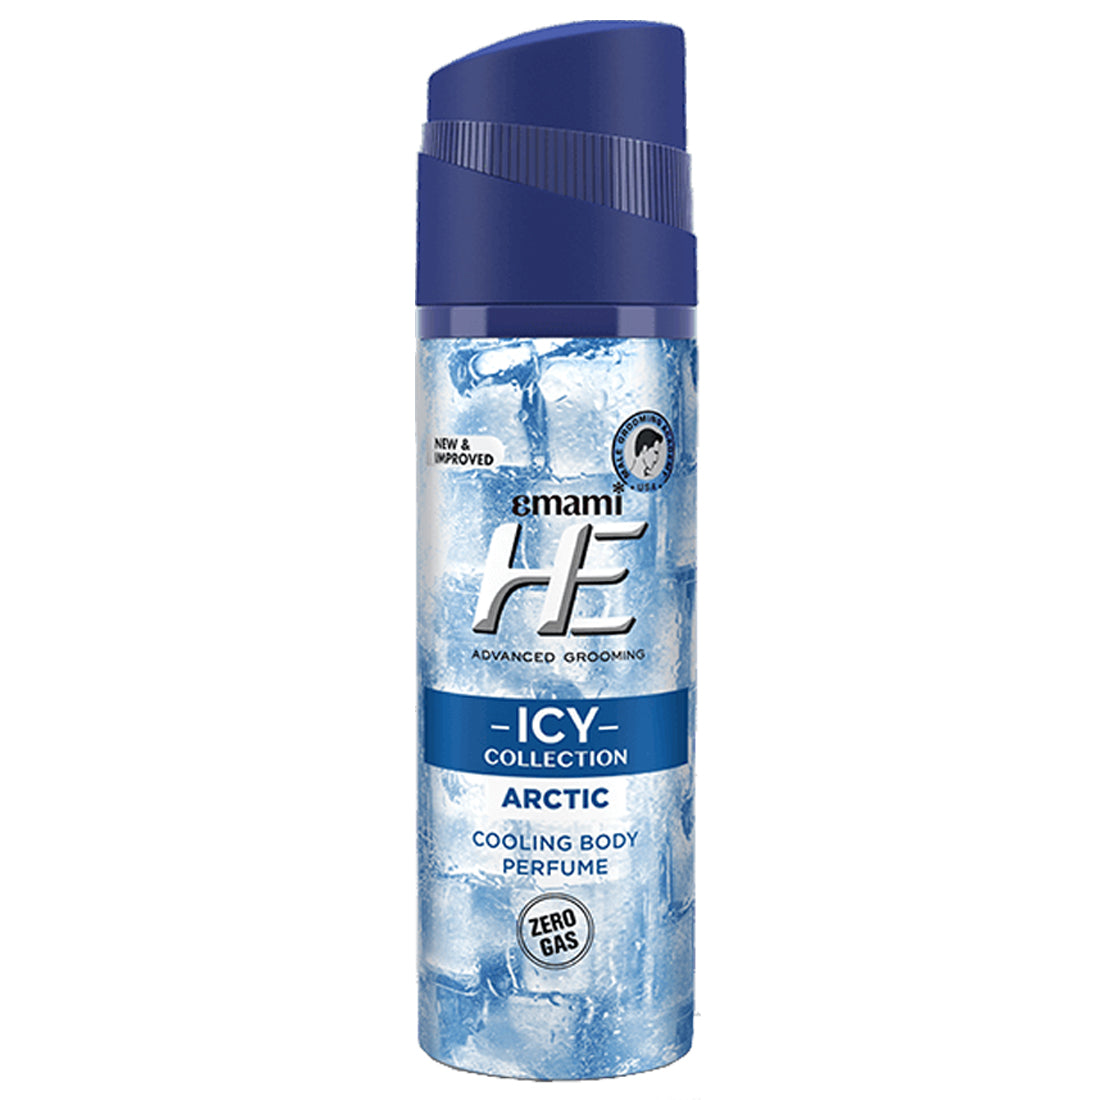 Emami HE ICY Collection Arctic Cooling Body Perfume 120ml